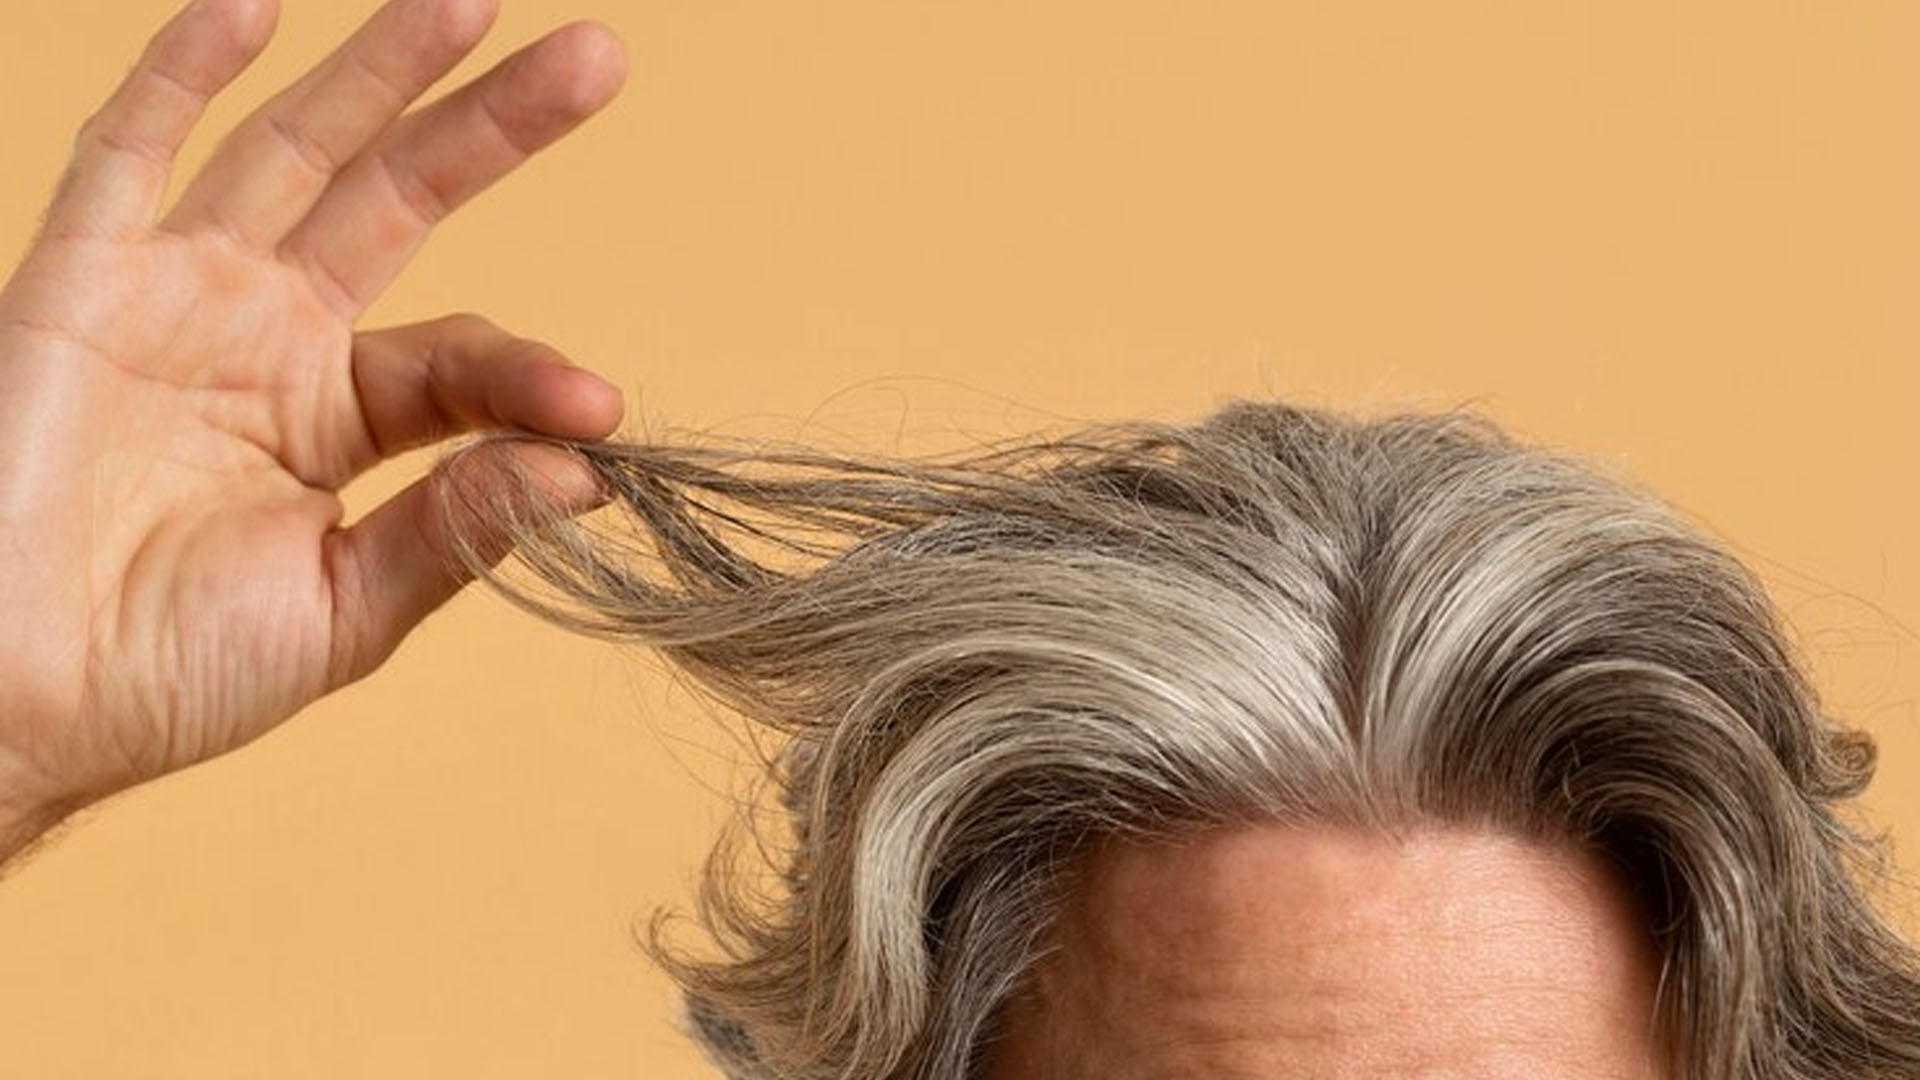 What are the Home Remedies to avoid Grey Hair?